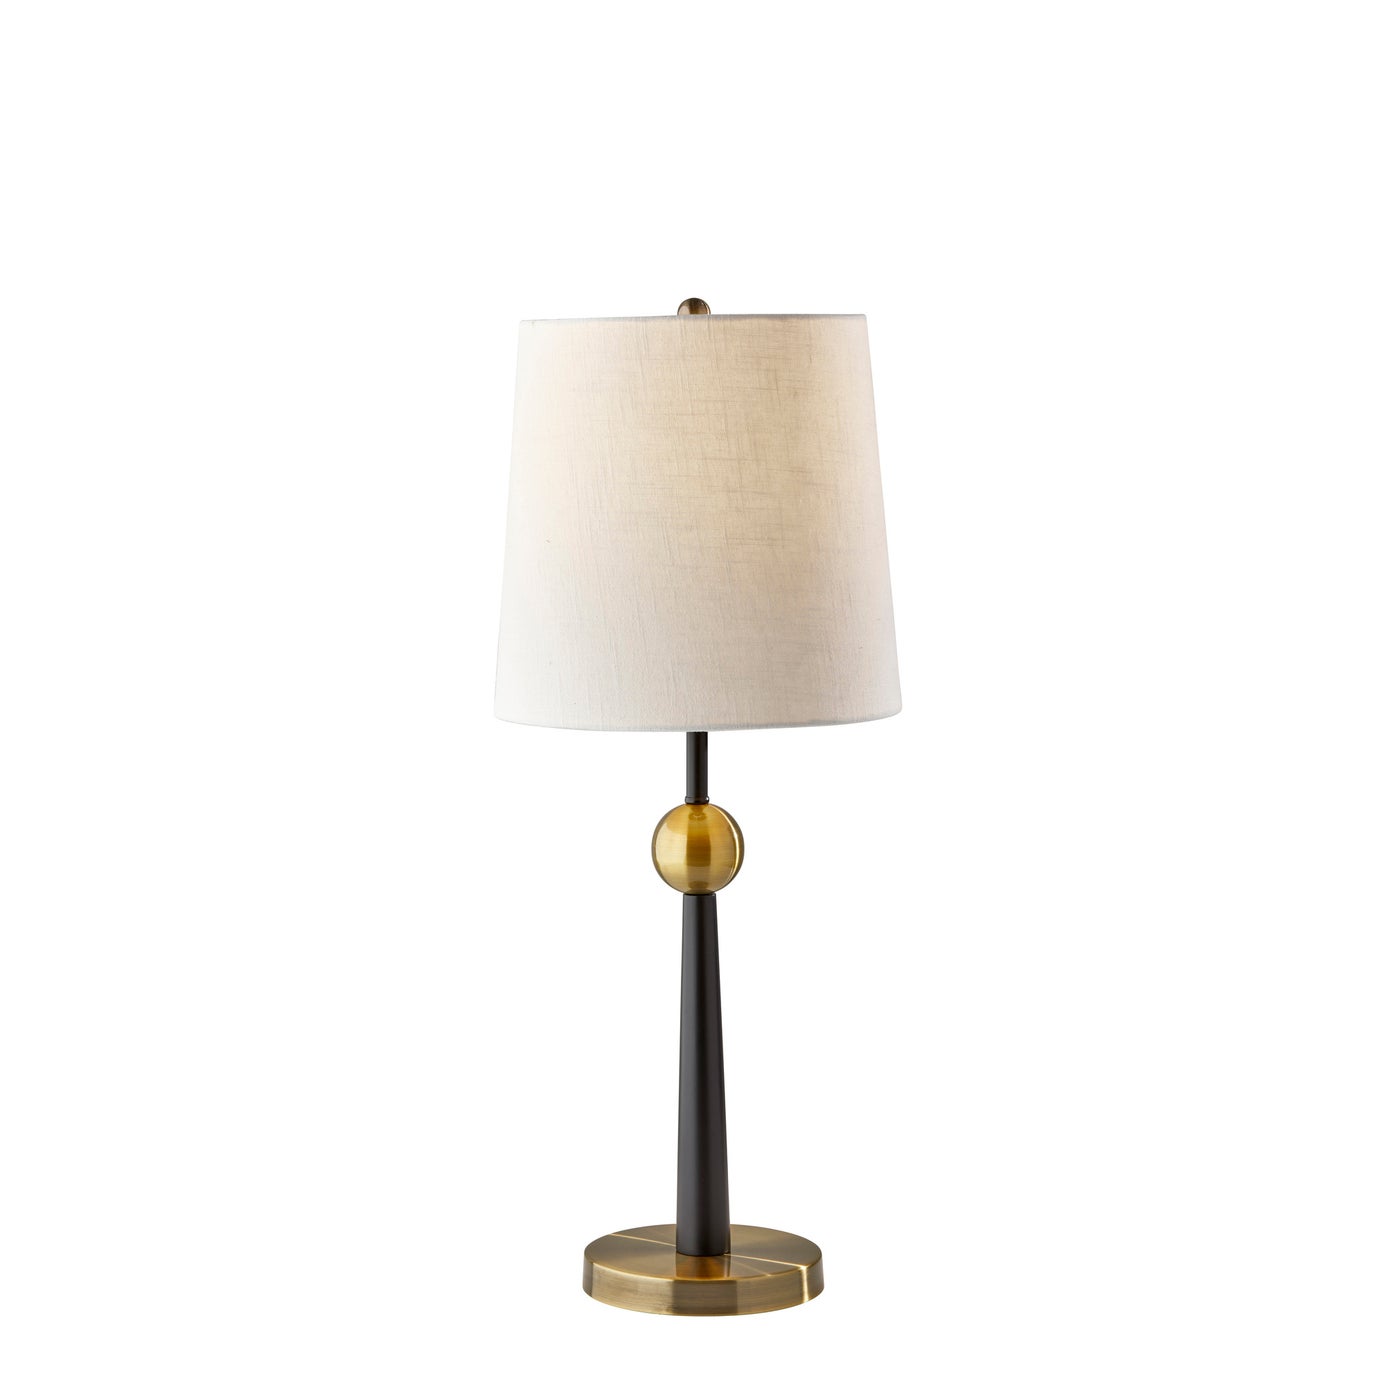 Adesso Home - 1574-01 - Table Lamp - Francis - Black & Antique Brass